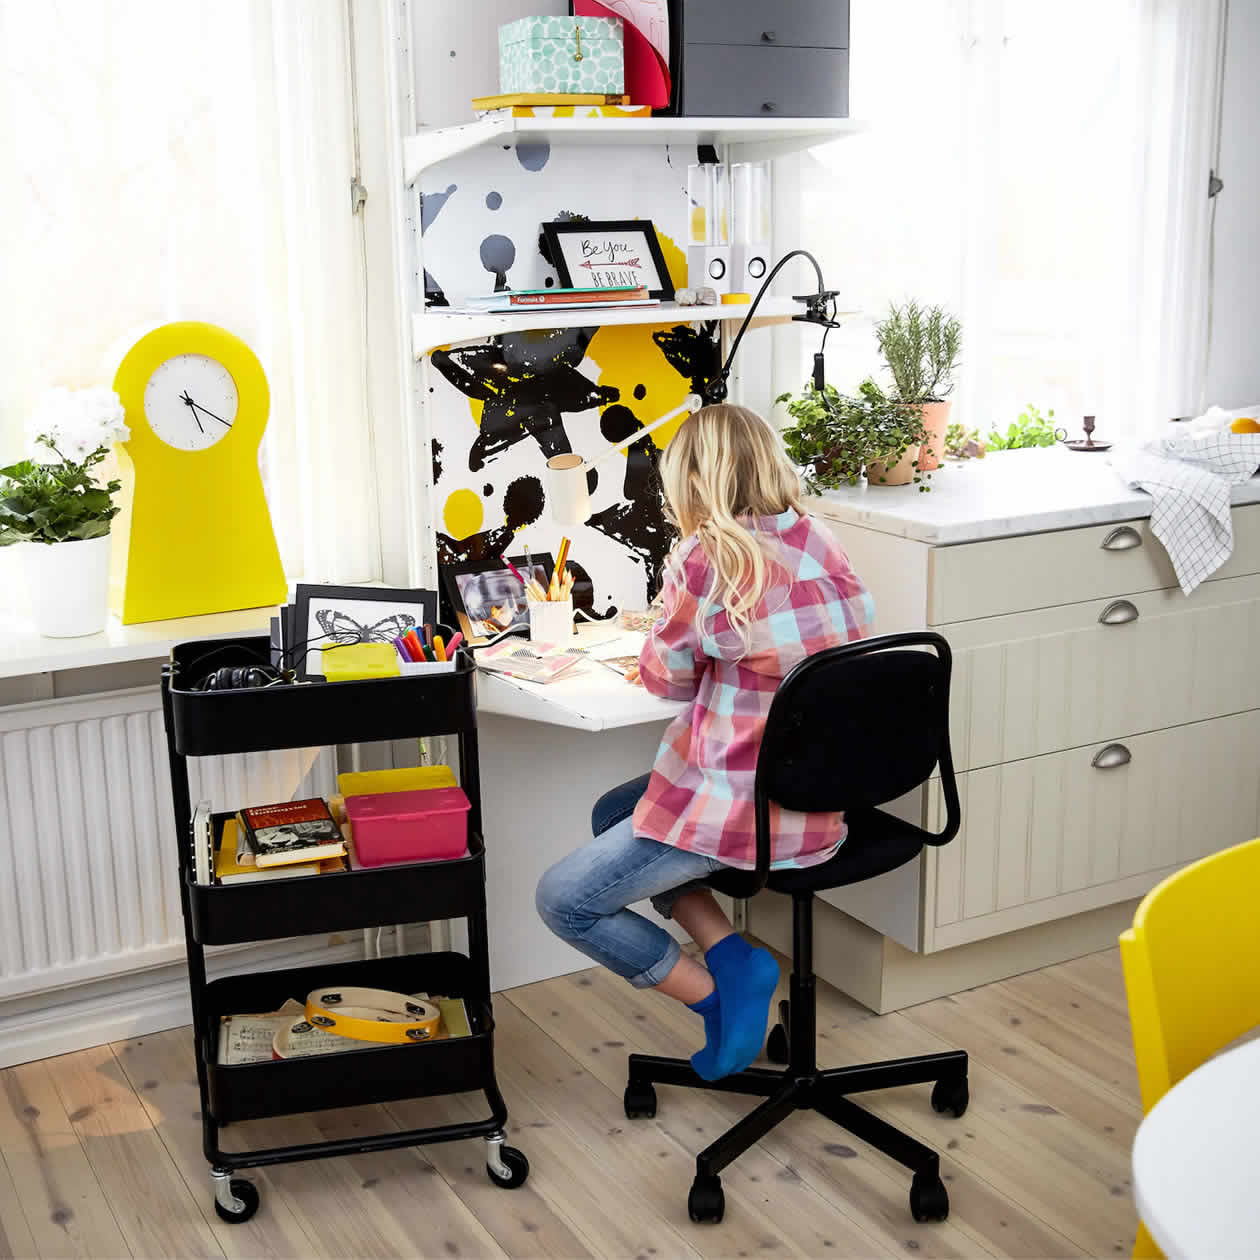 IKEA-how to create a study nook for kids 2